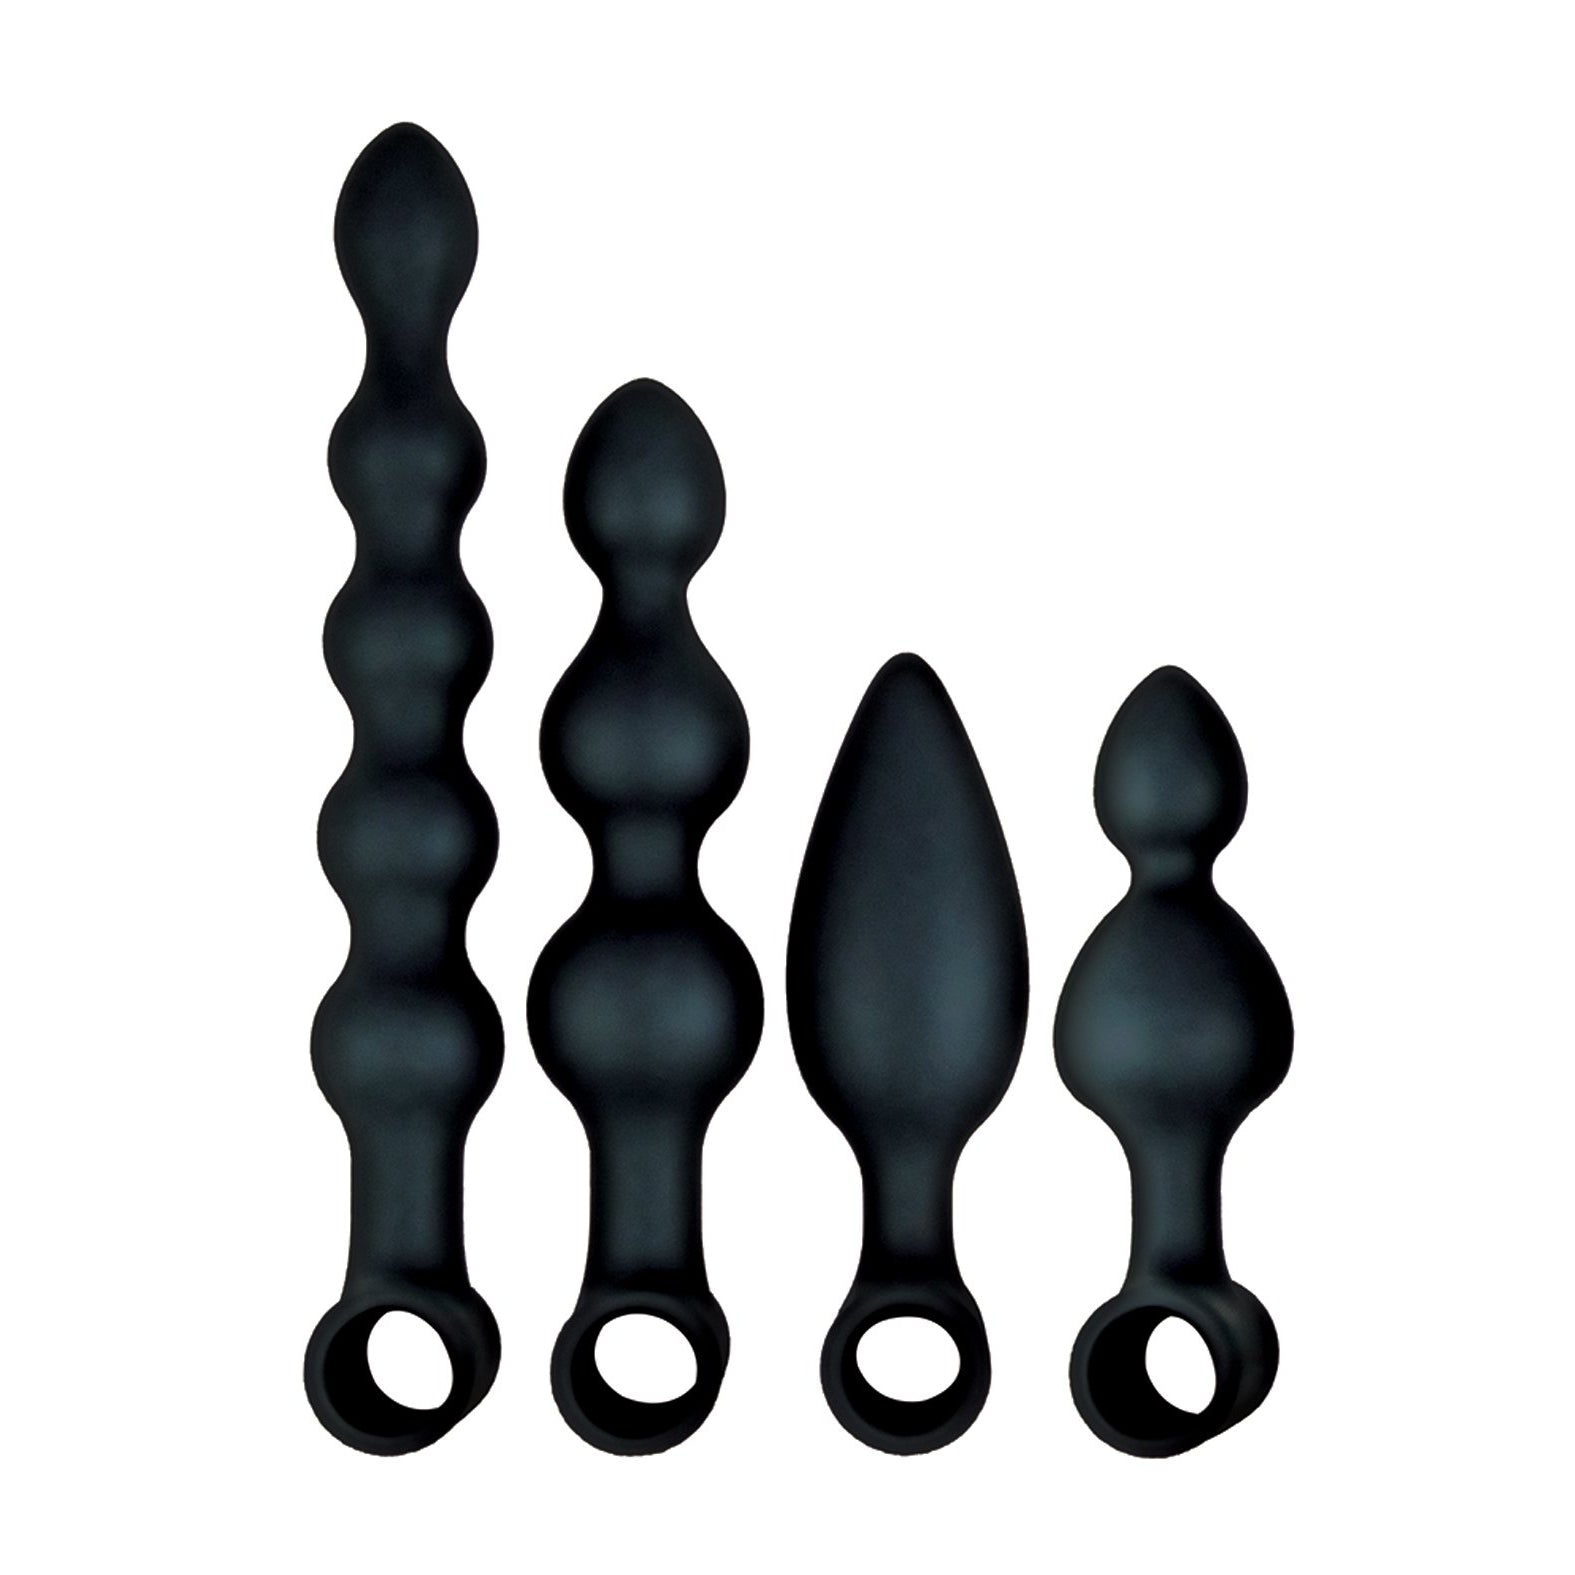 Anal-Ese Collection Vibrating Anal Fantasy Kit